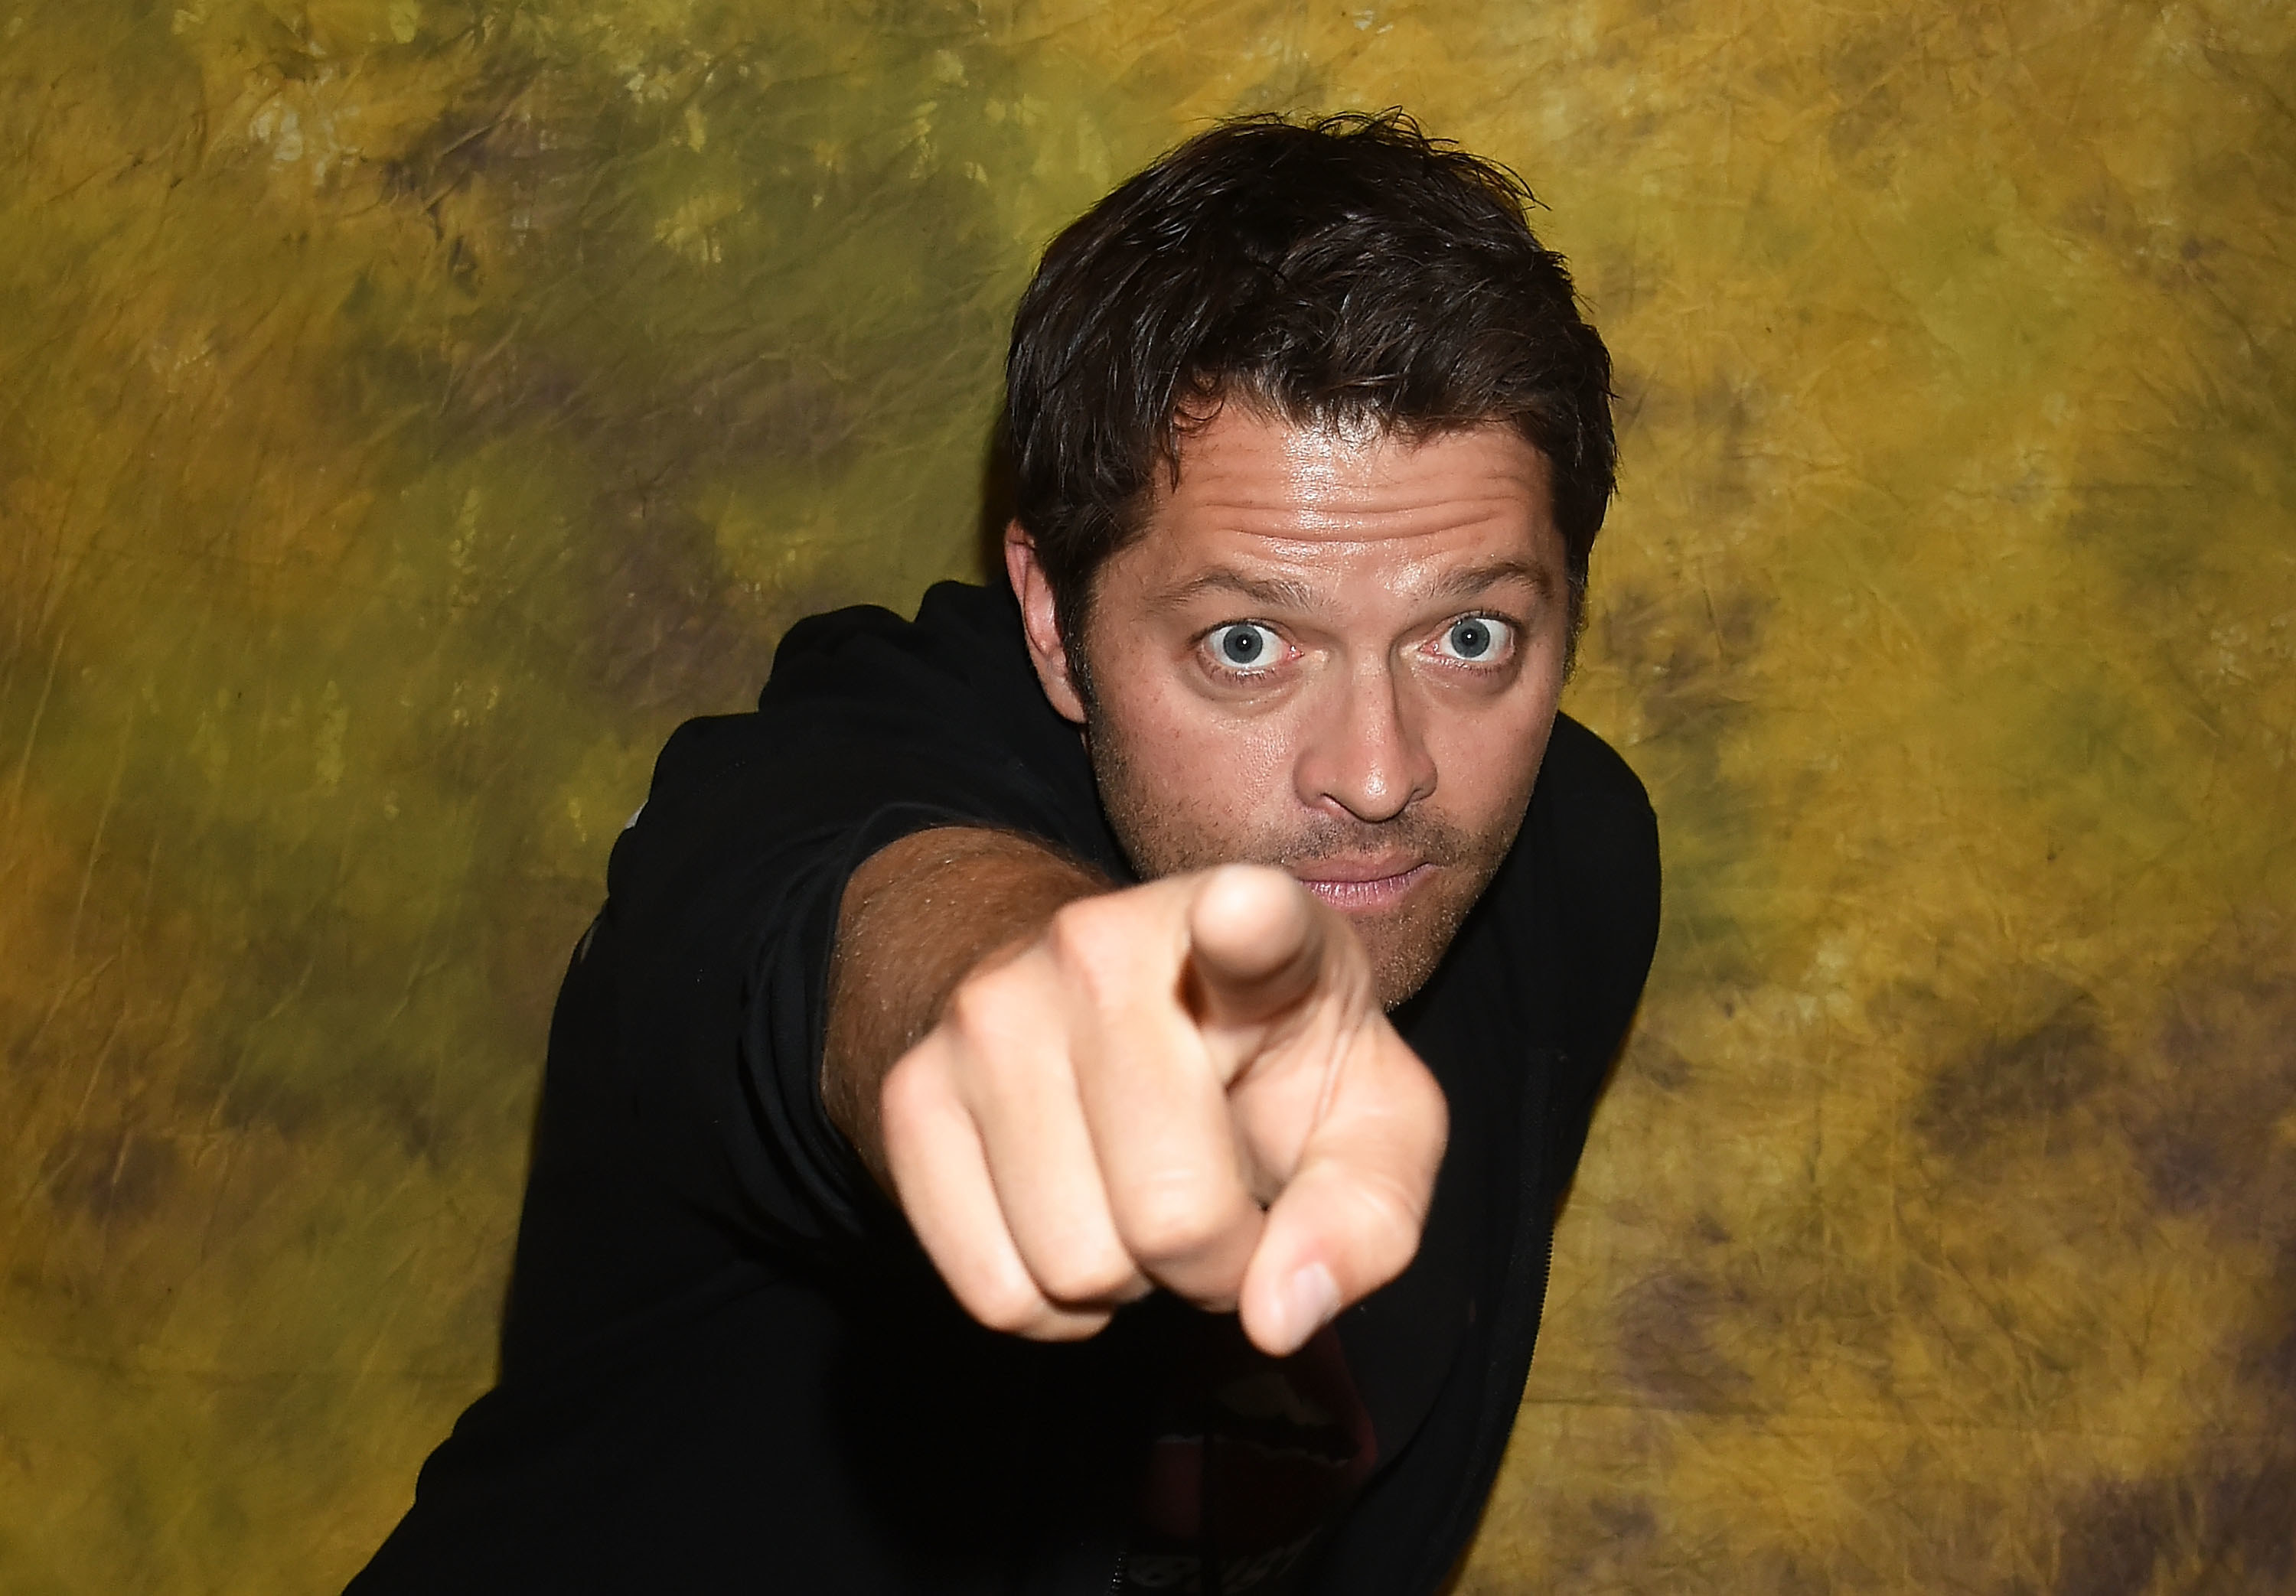 Misha Collins points at the camera